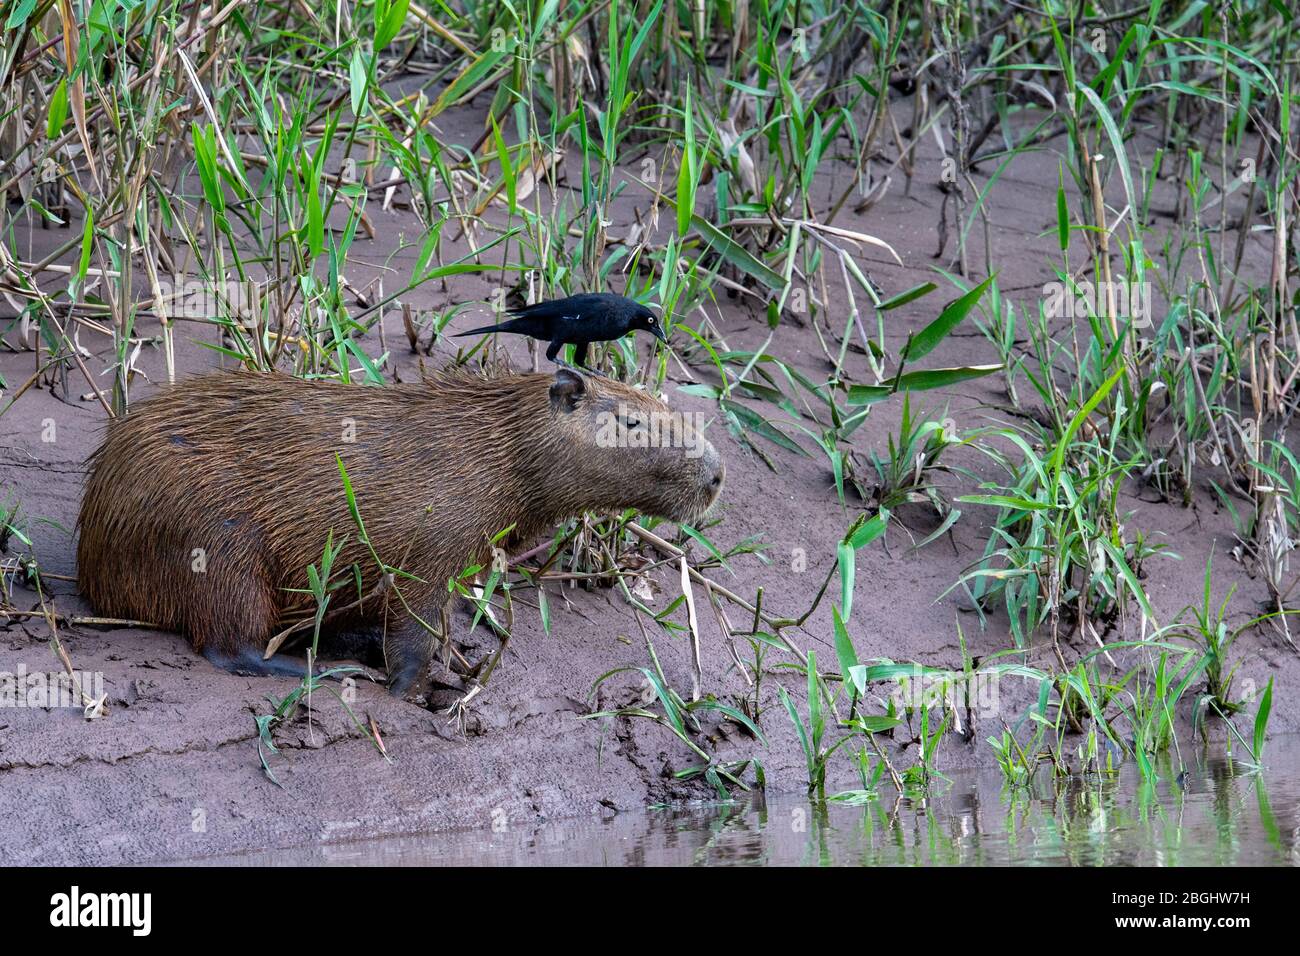 Capybara family on bank of river in the Amazon Forest, Peru Stock Photo